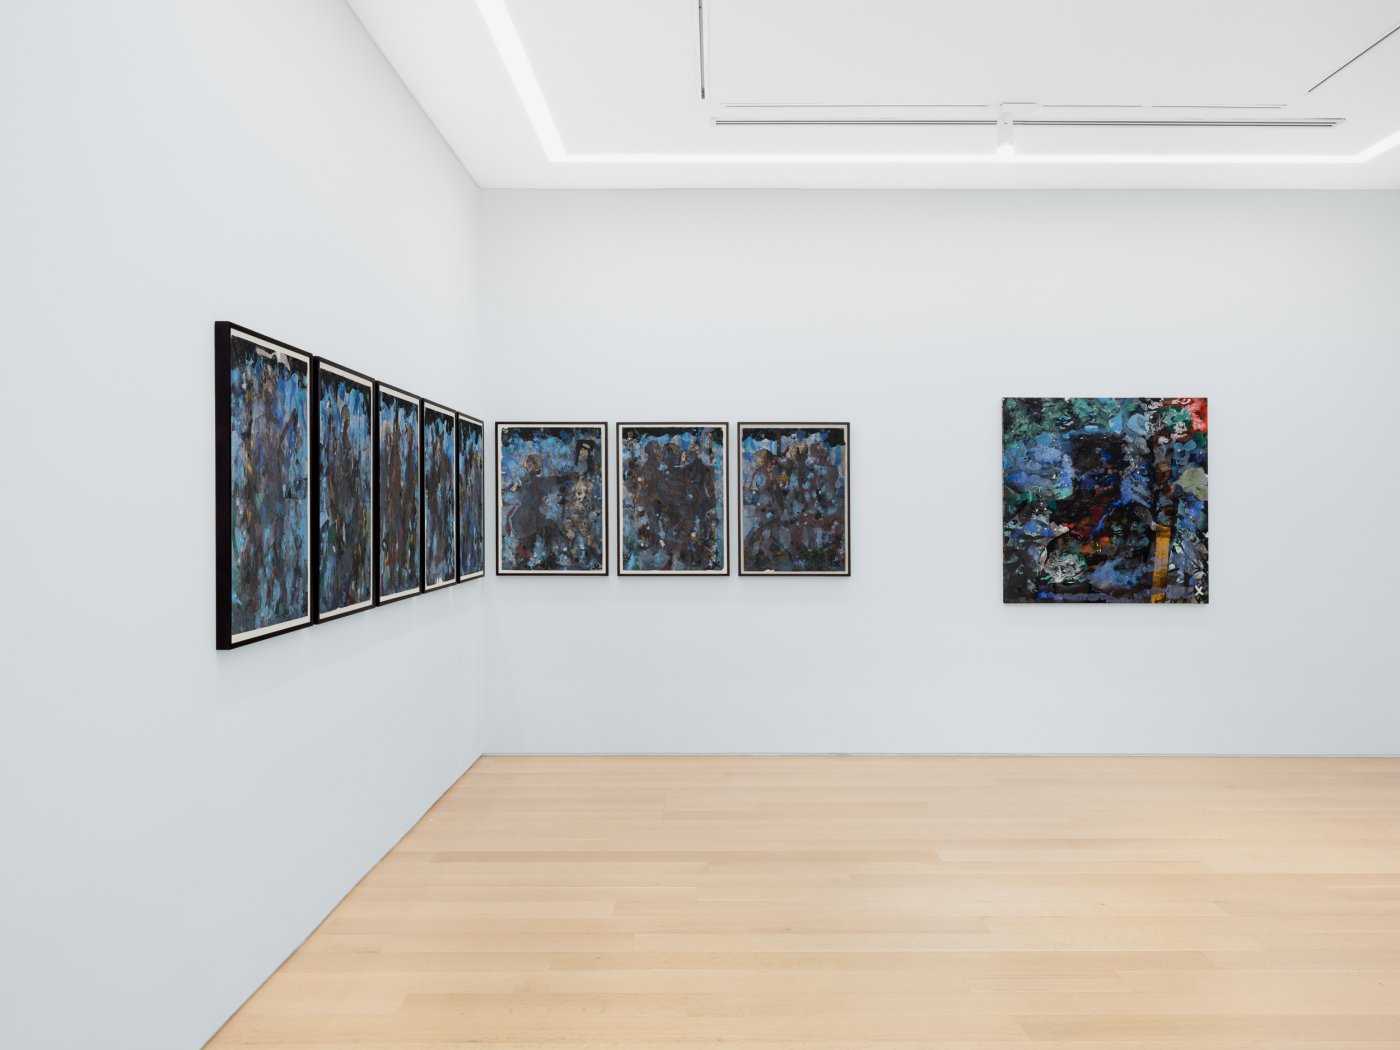 Installation image for Deanio X: Symphony of Storms, at Marlborough